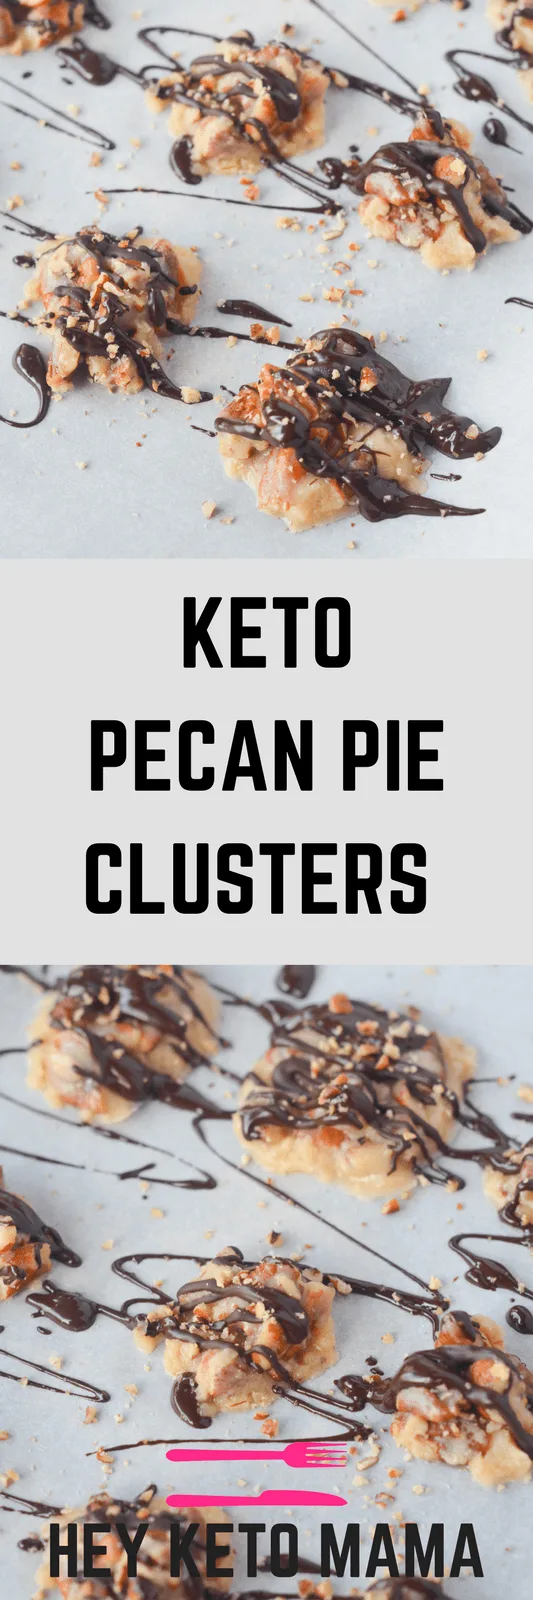 These Keto Pecan Pie Clusters are a great, easy to make treat for satisfying any low carb sweet tooth! | heyketomama.com